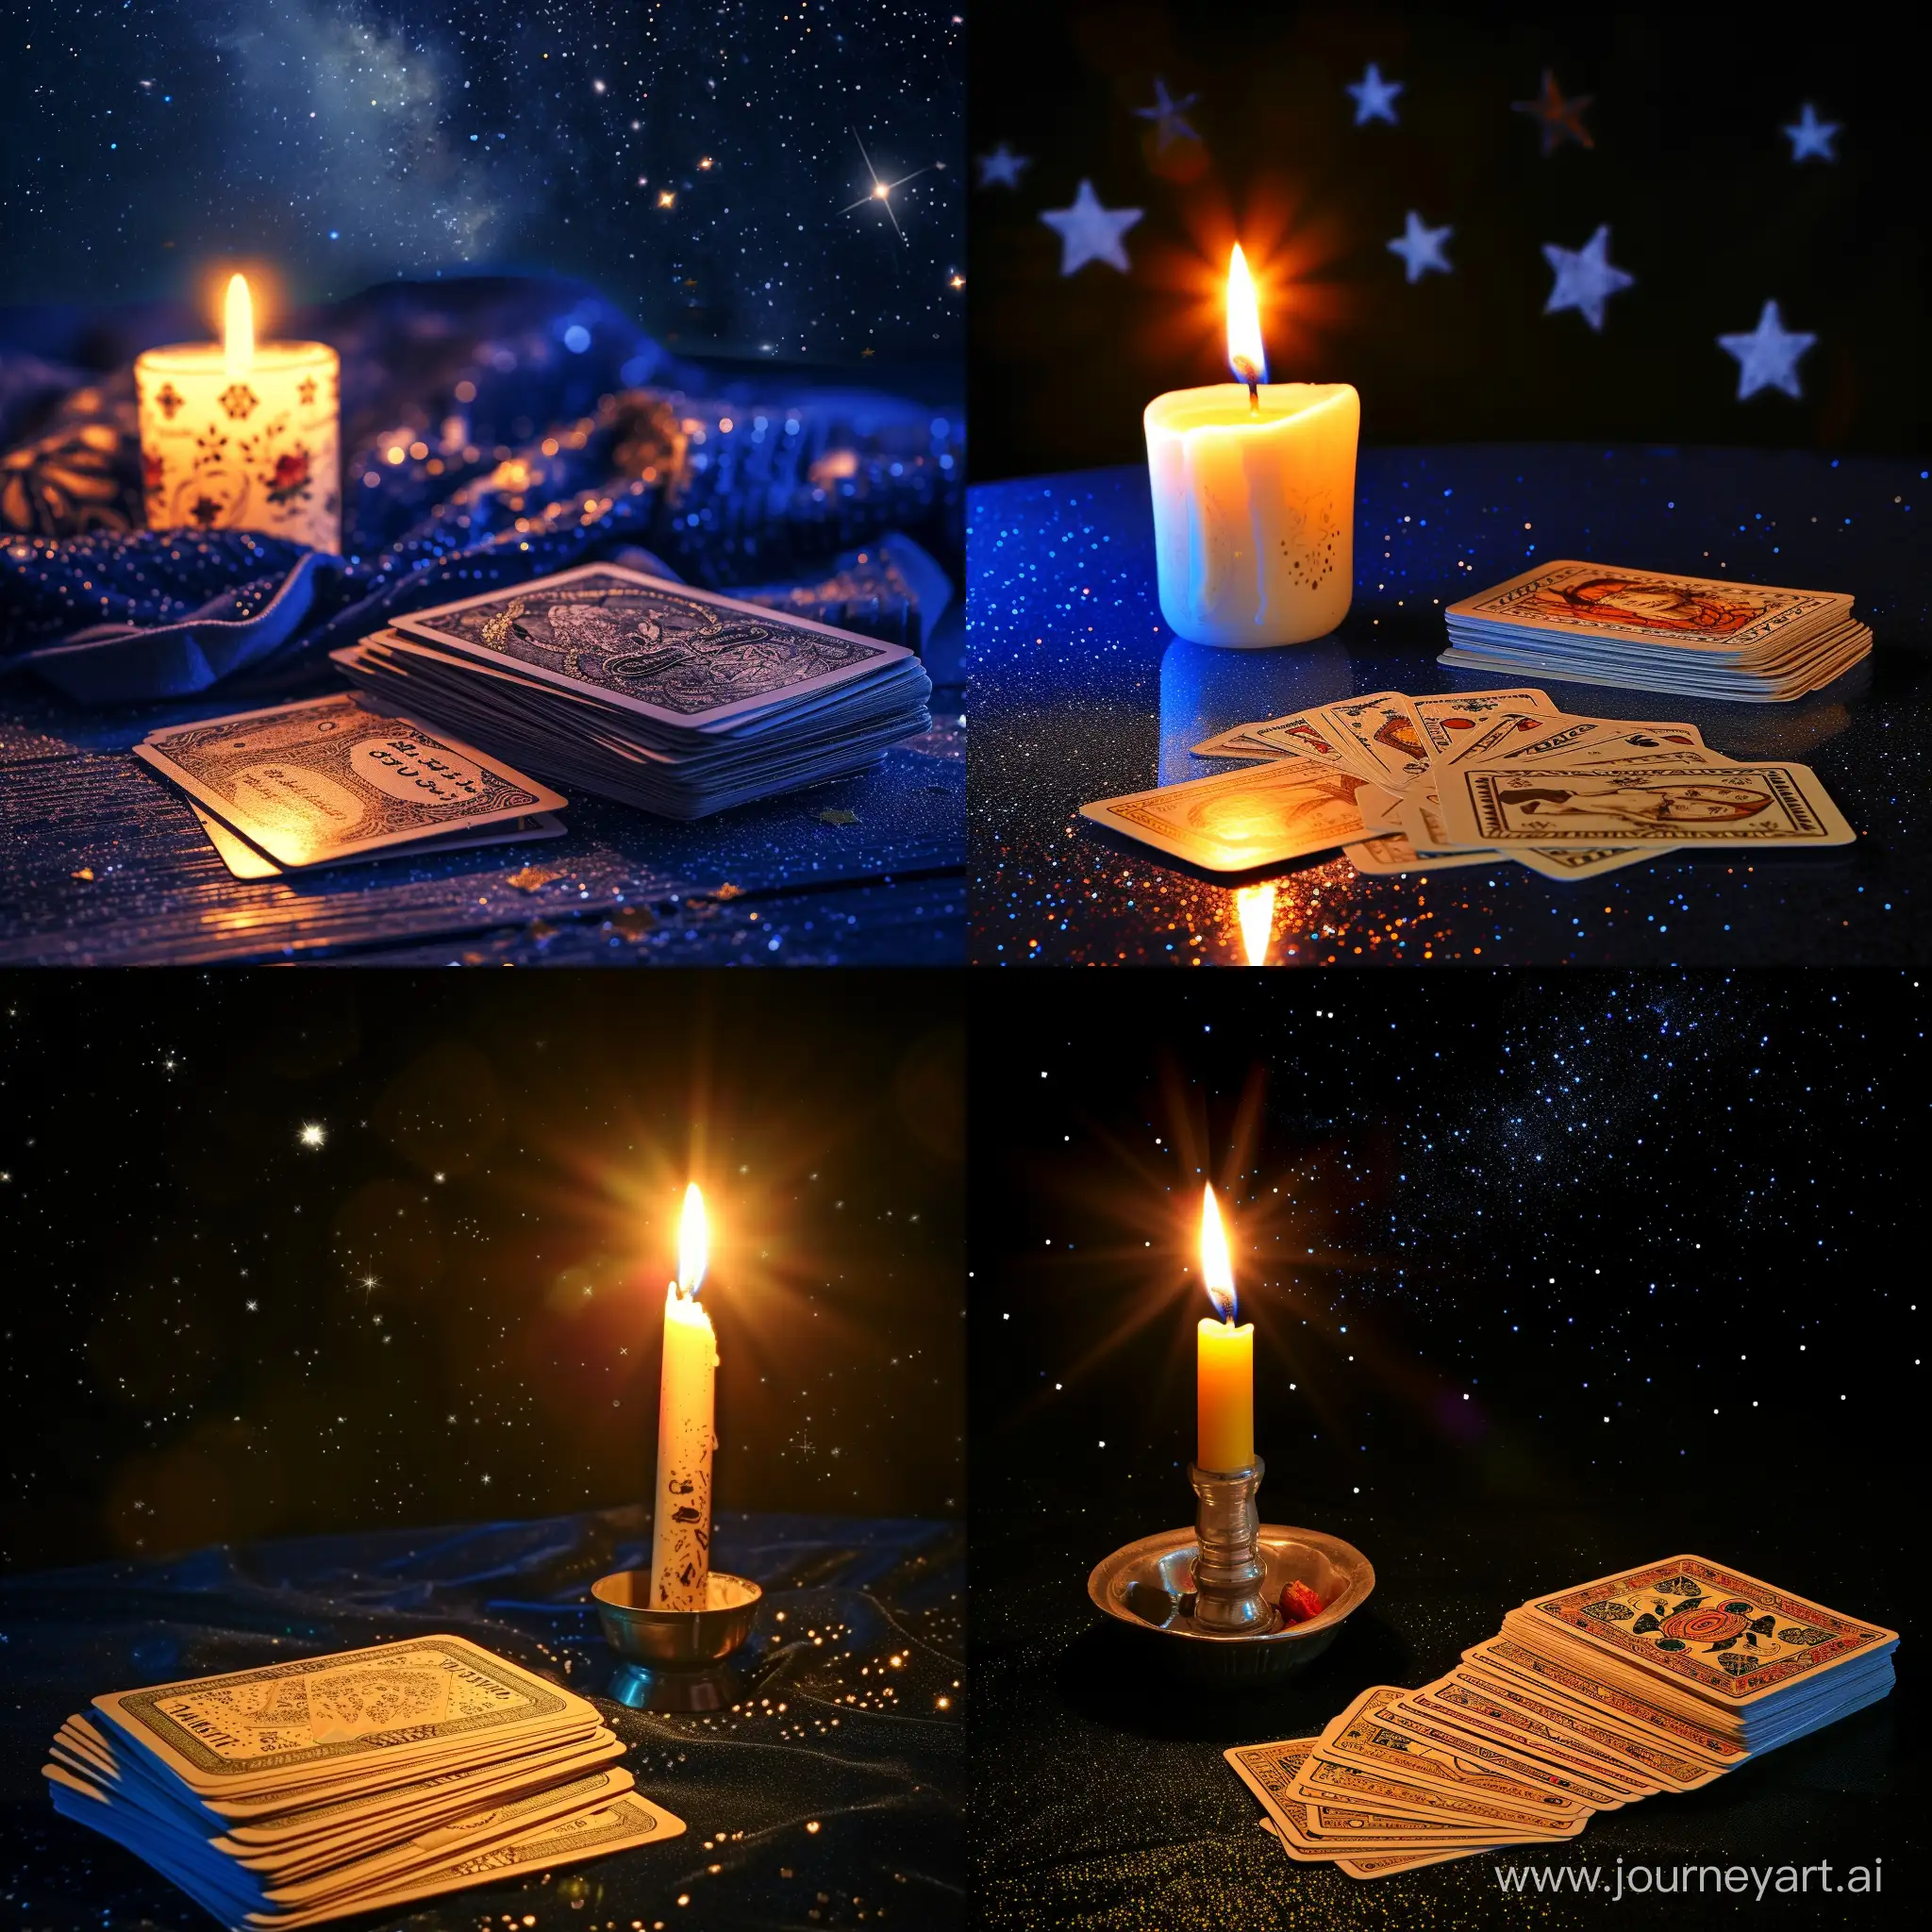 Mystical-Night-FortuneTelling-with-Stars-and-Candlelight